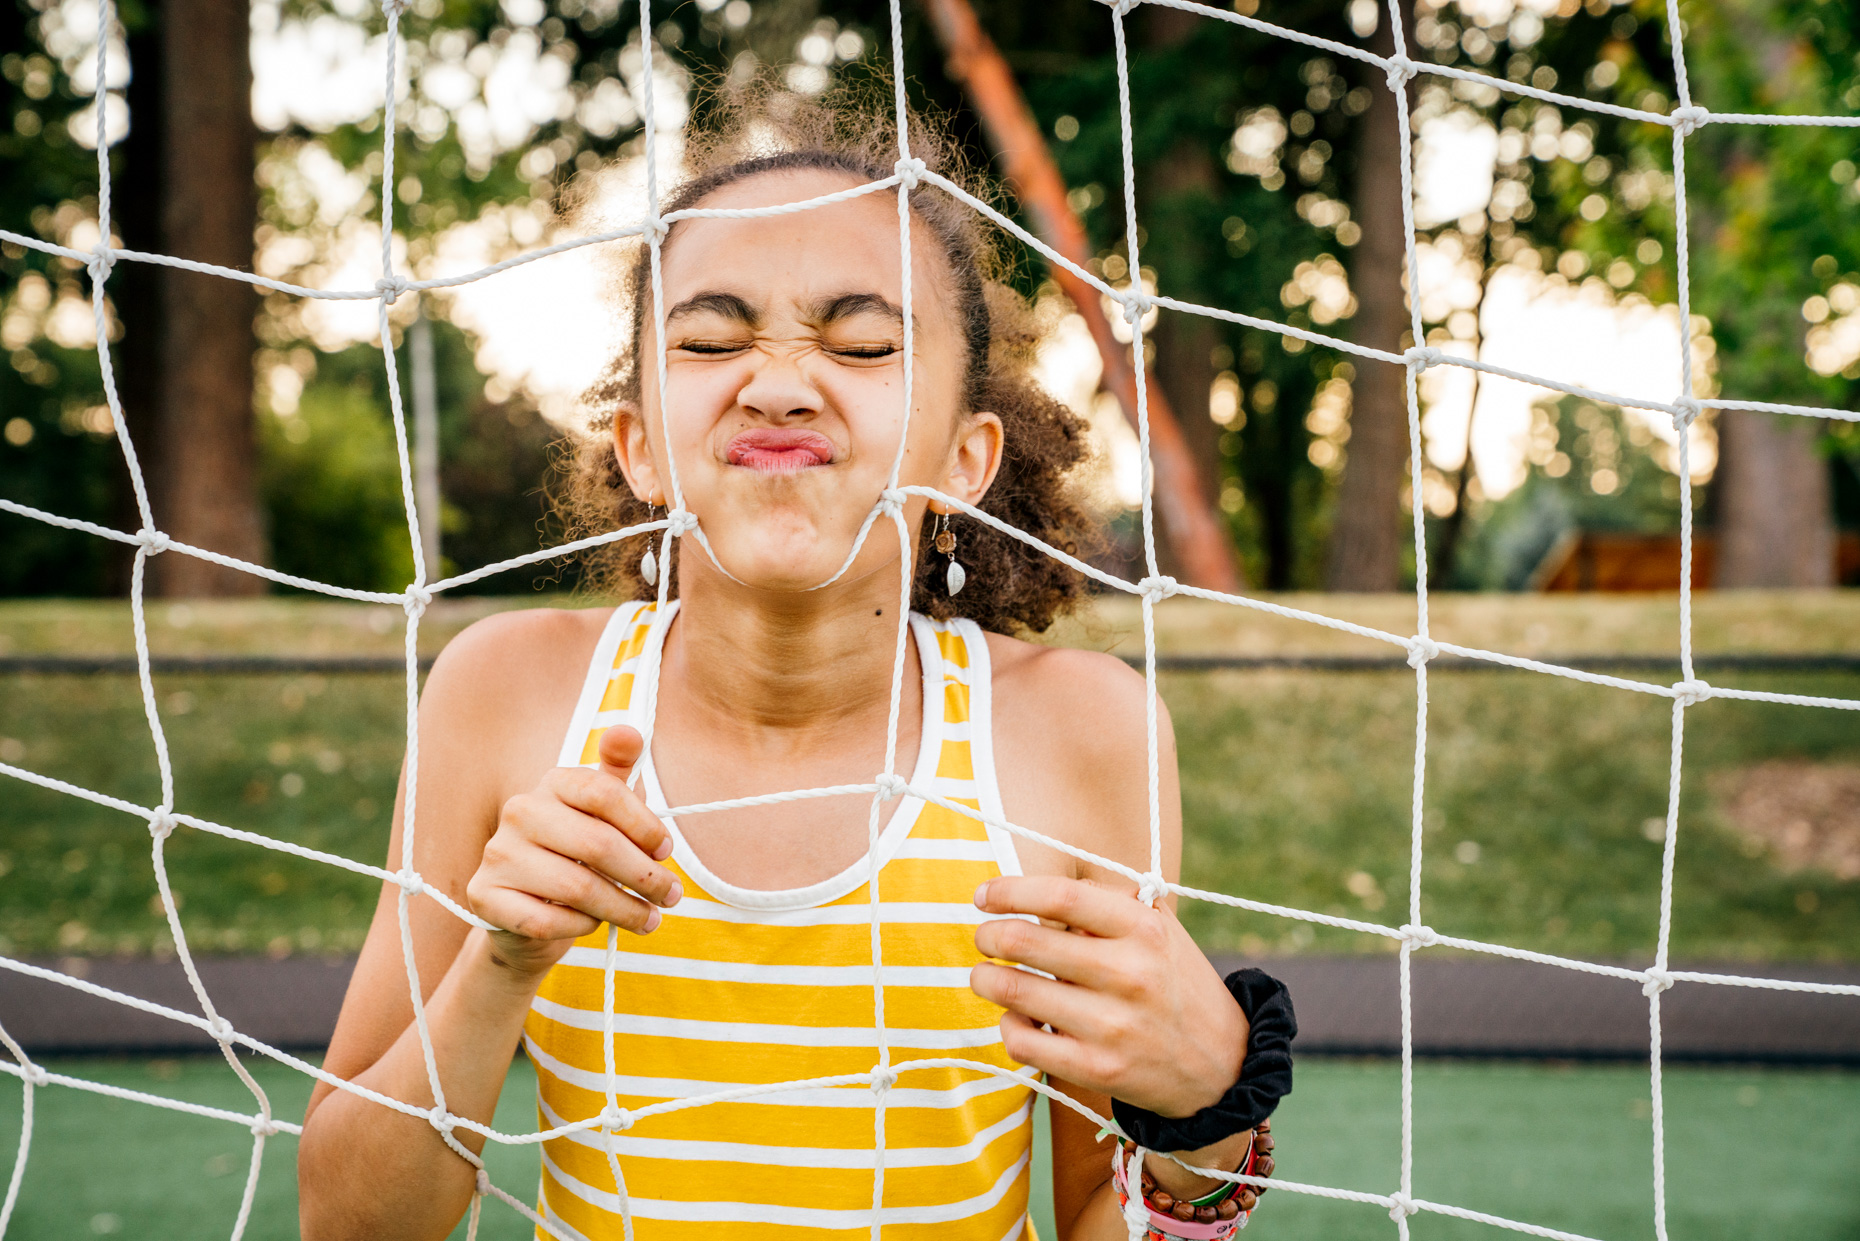 Teen-girl-with-face-in-soccer-goal-string-eyes-closed-20190630_NA_3081-2